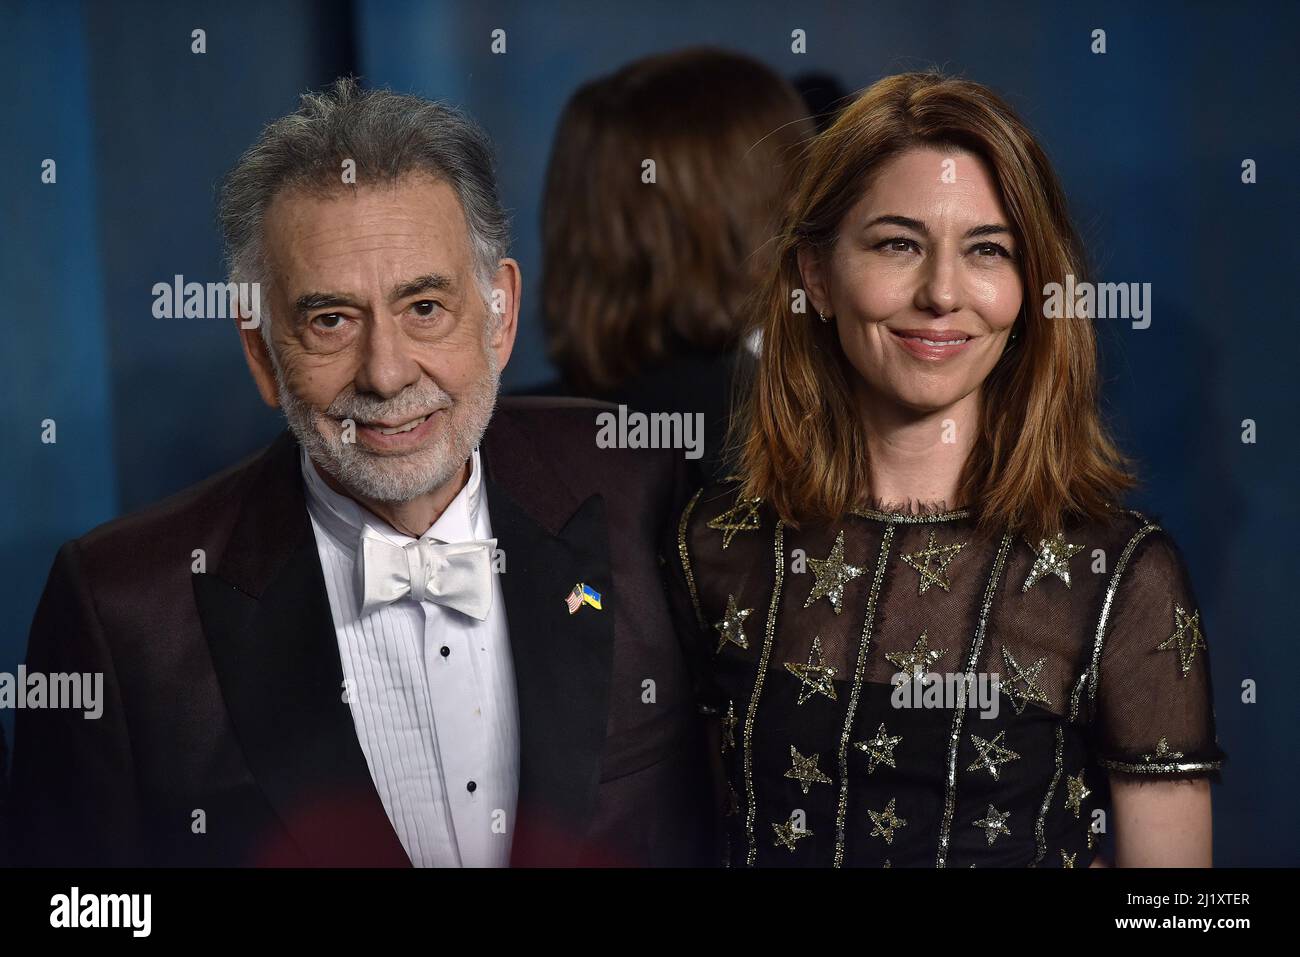 Sofia coppola and daughter hi-res stock photography and images - Alamy